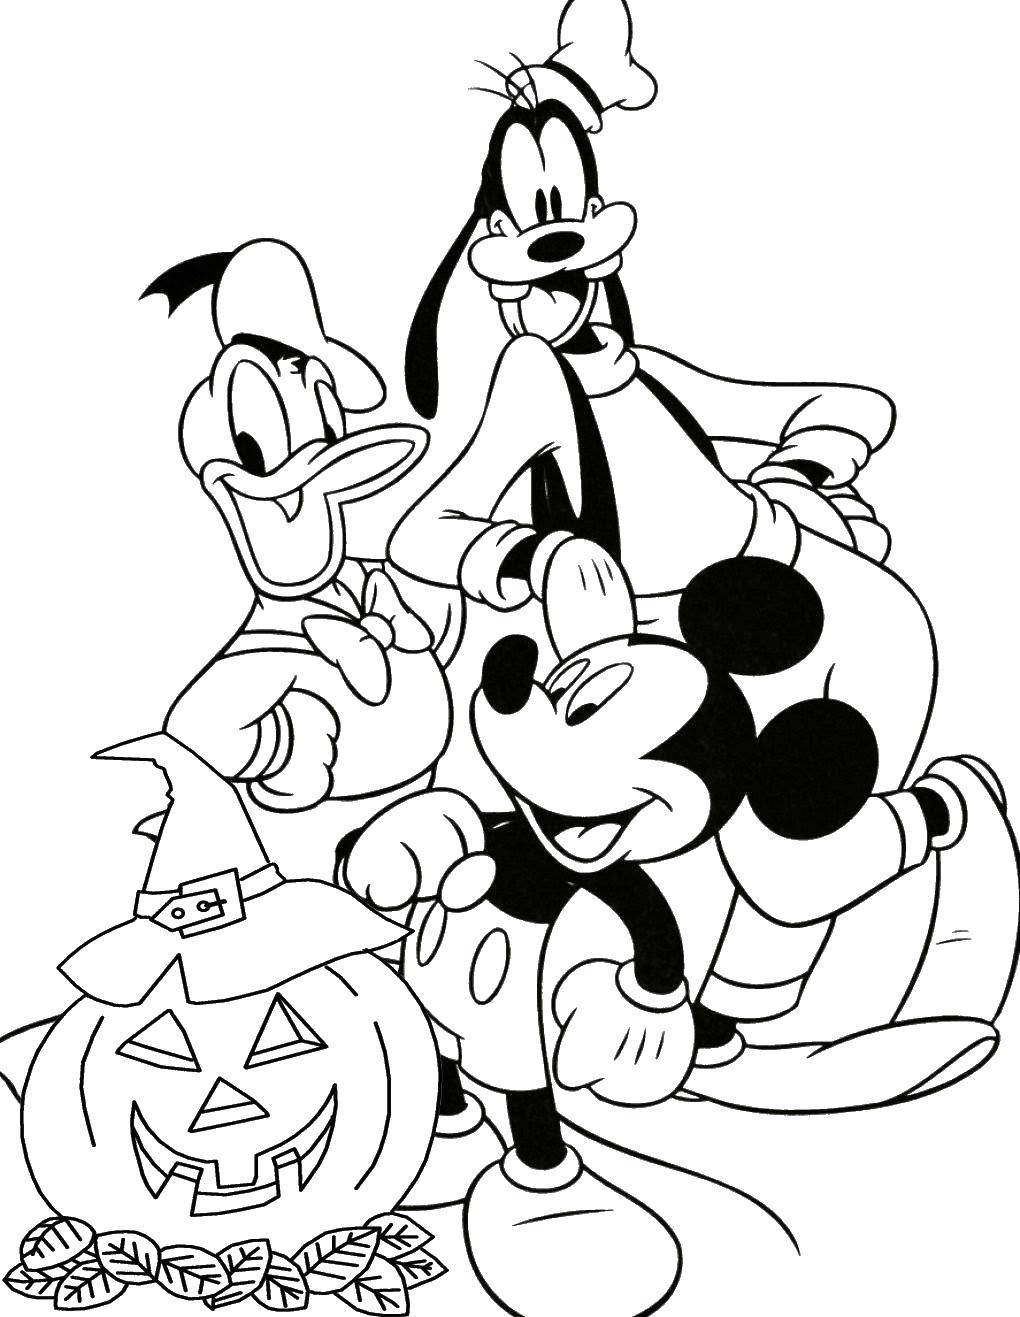 Coloring Goofy, Donald duck and Mickey mouse. Category Disney cartoons. Tags:  Disney, goofy, Donald duck, Mickey mouse.